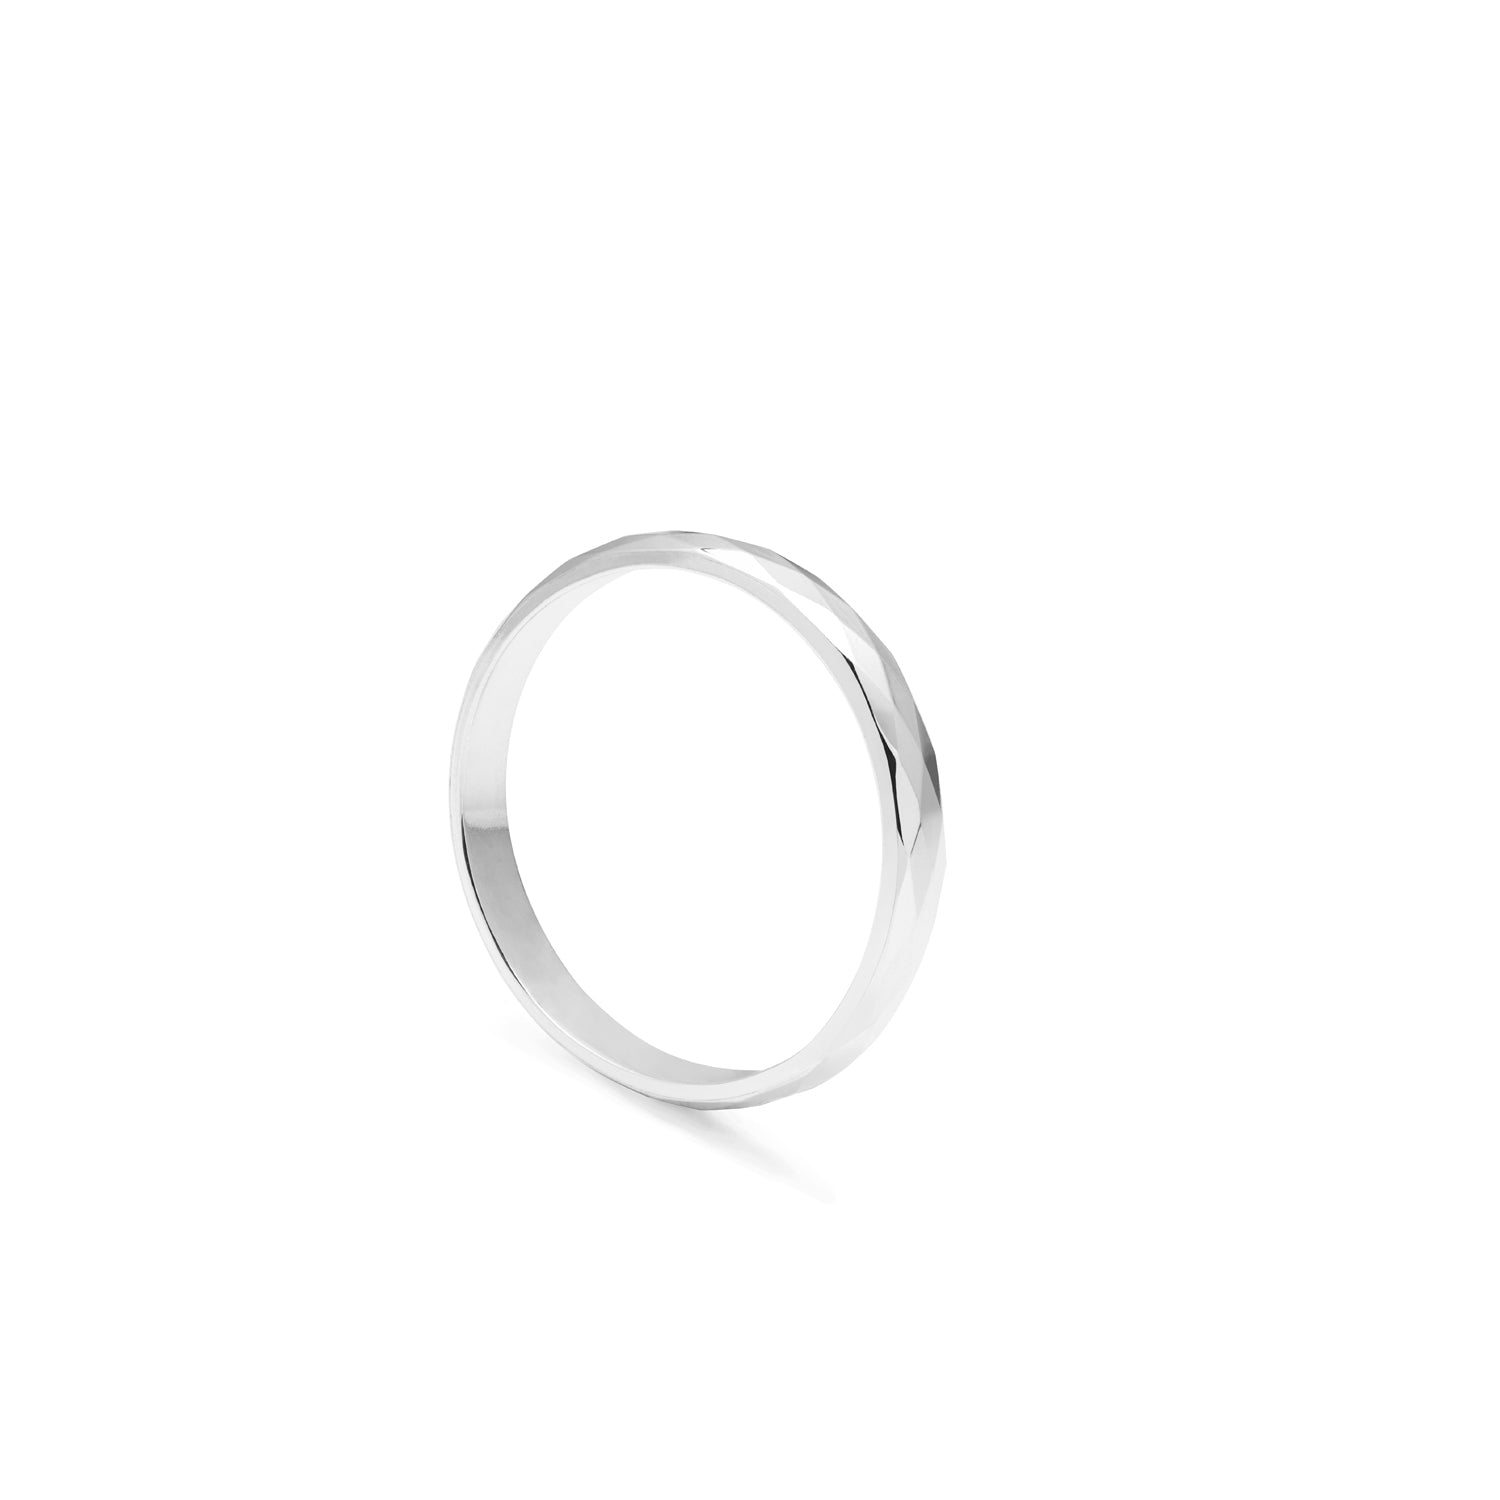 Paragon Ring - Silver - Myia Bonner Jewellery